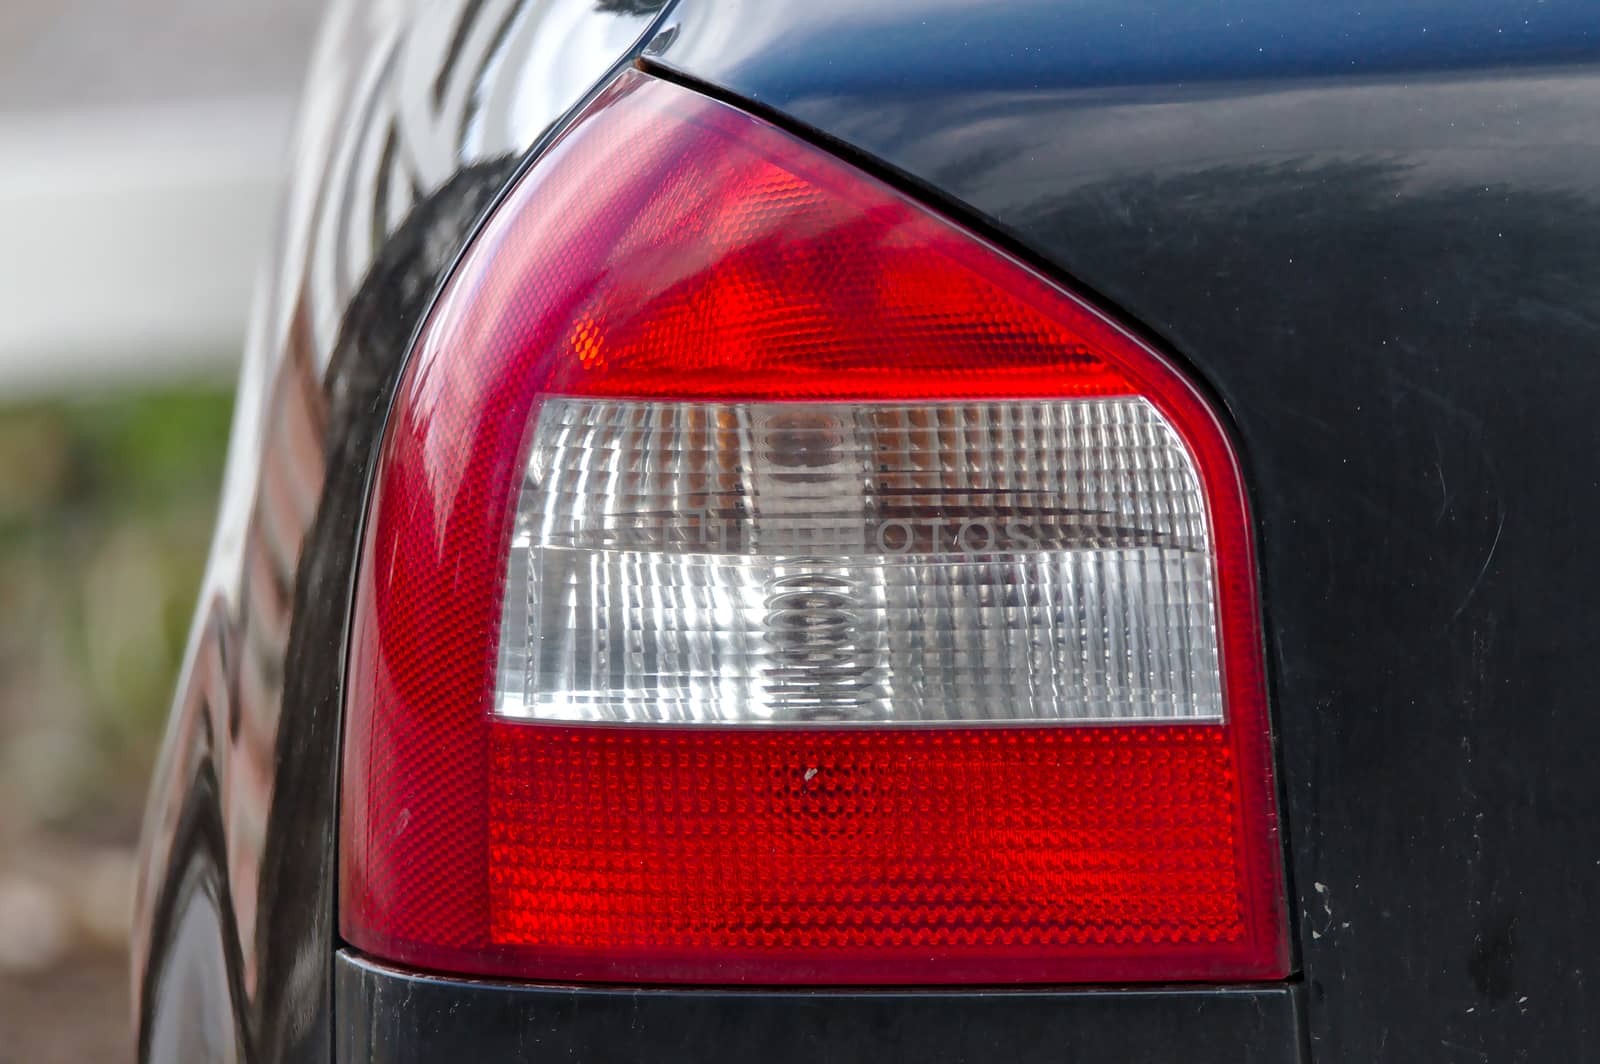 Clean and good condition car taillight. Clear glass turn signal and reversing lights.